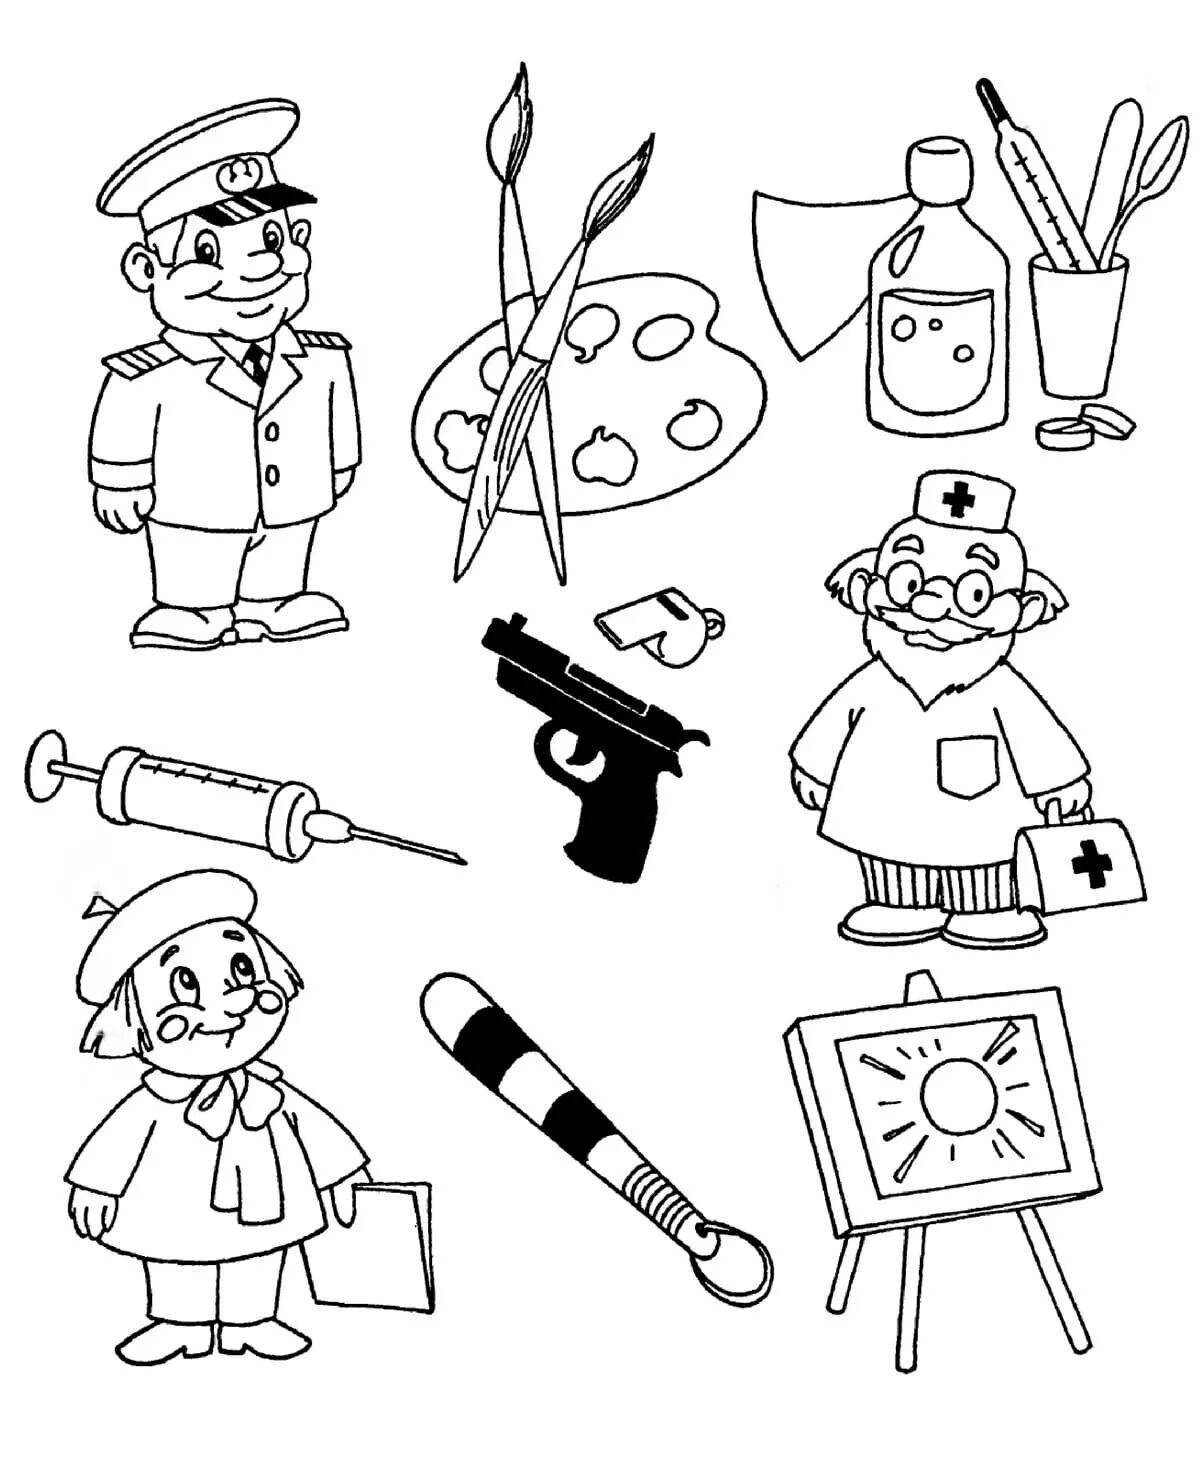 Color-bright professions and tools coloring book